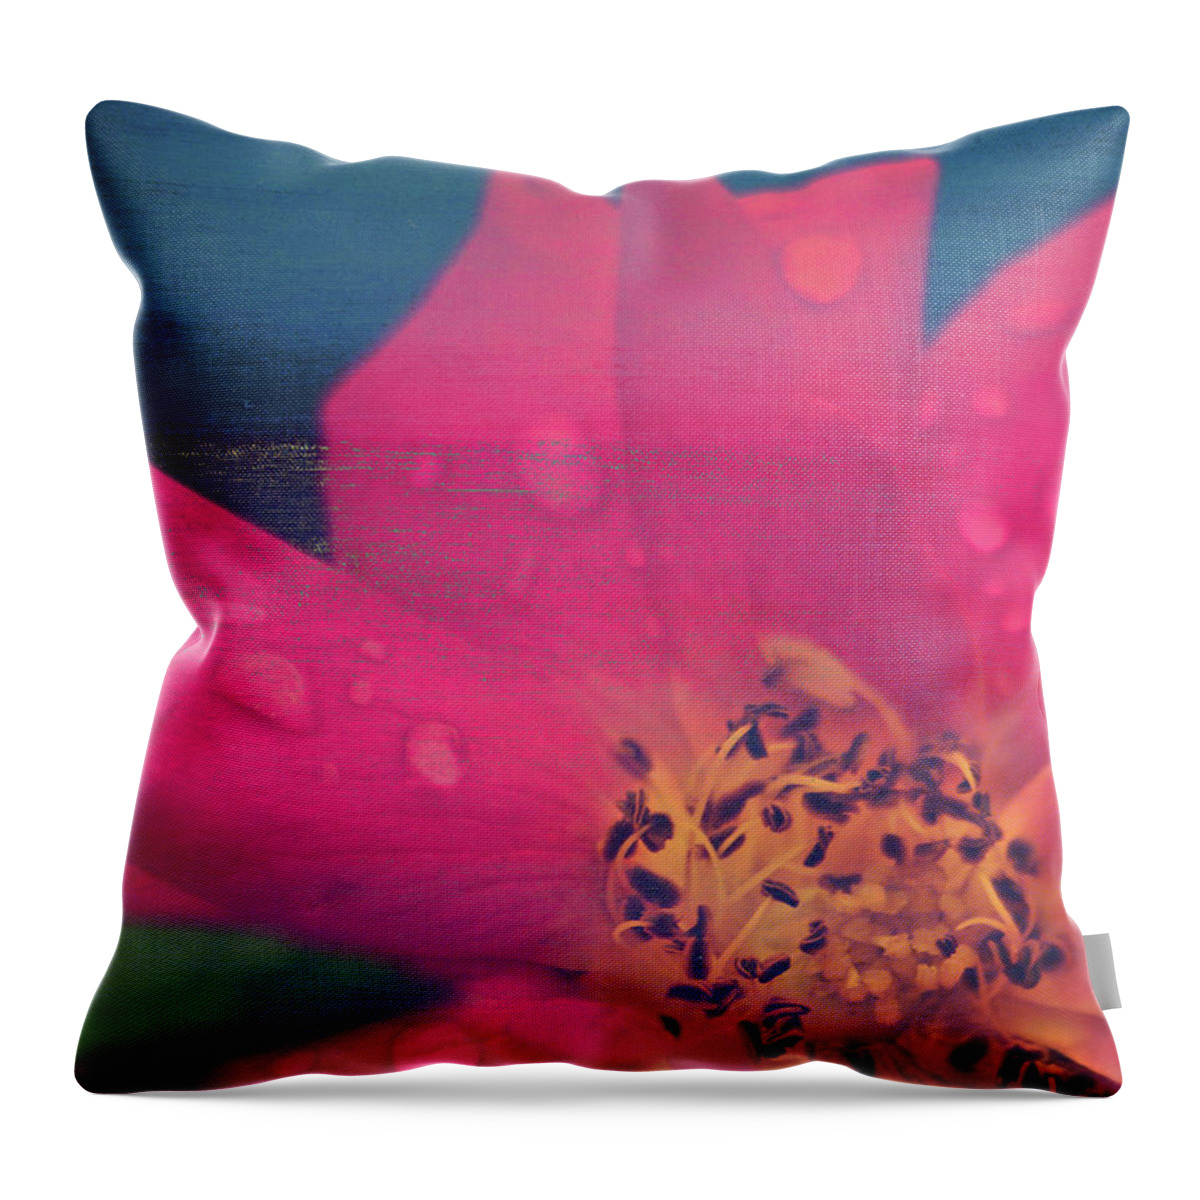 Texture Throw Pillow featuring the photograph Texture Flowers #21 by Prince Andre Faubert